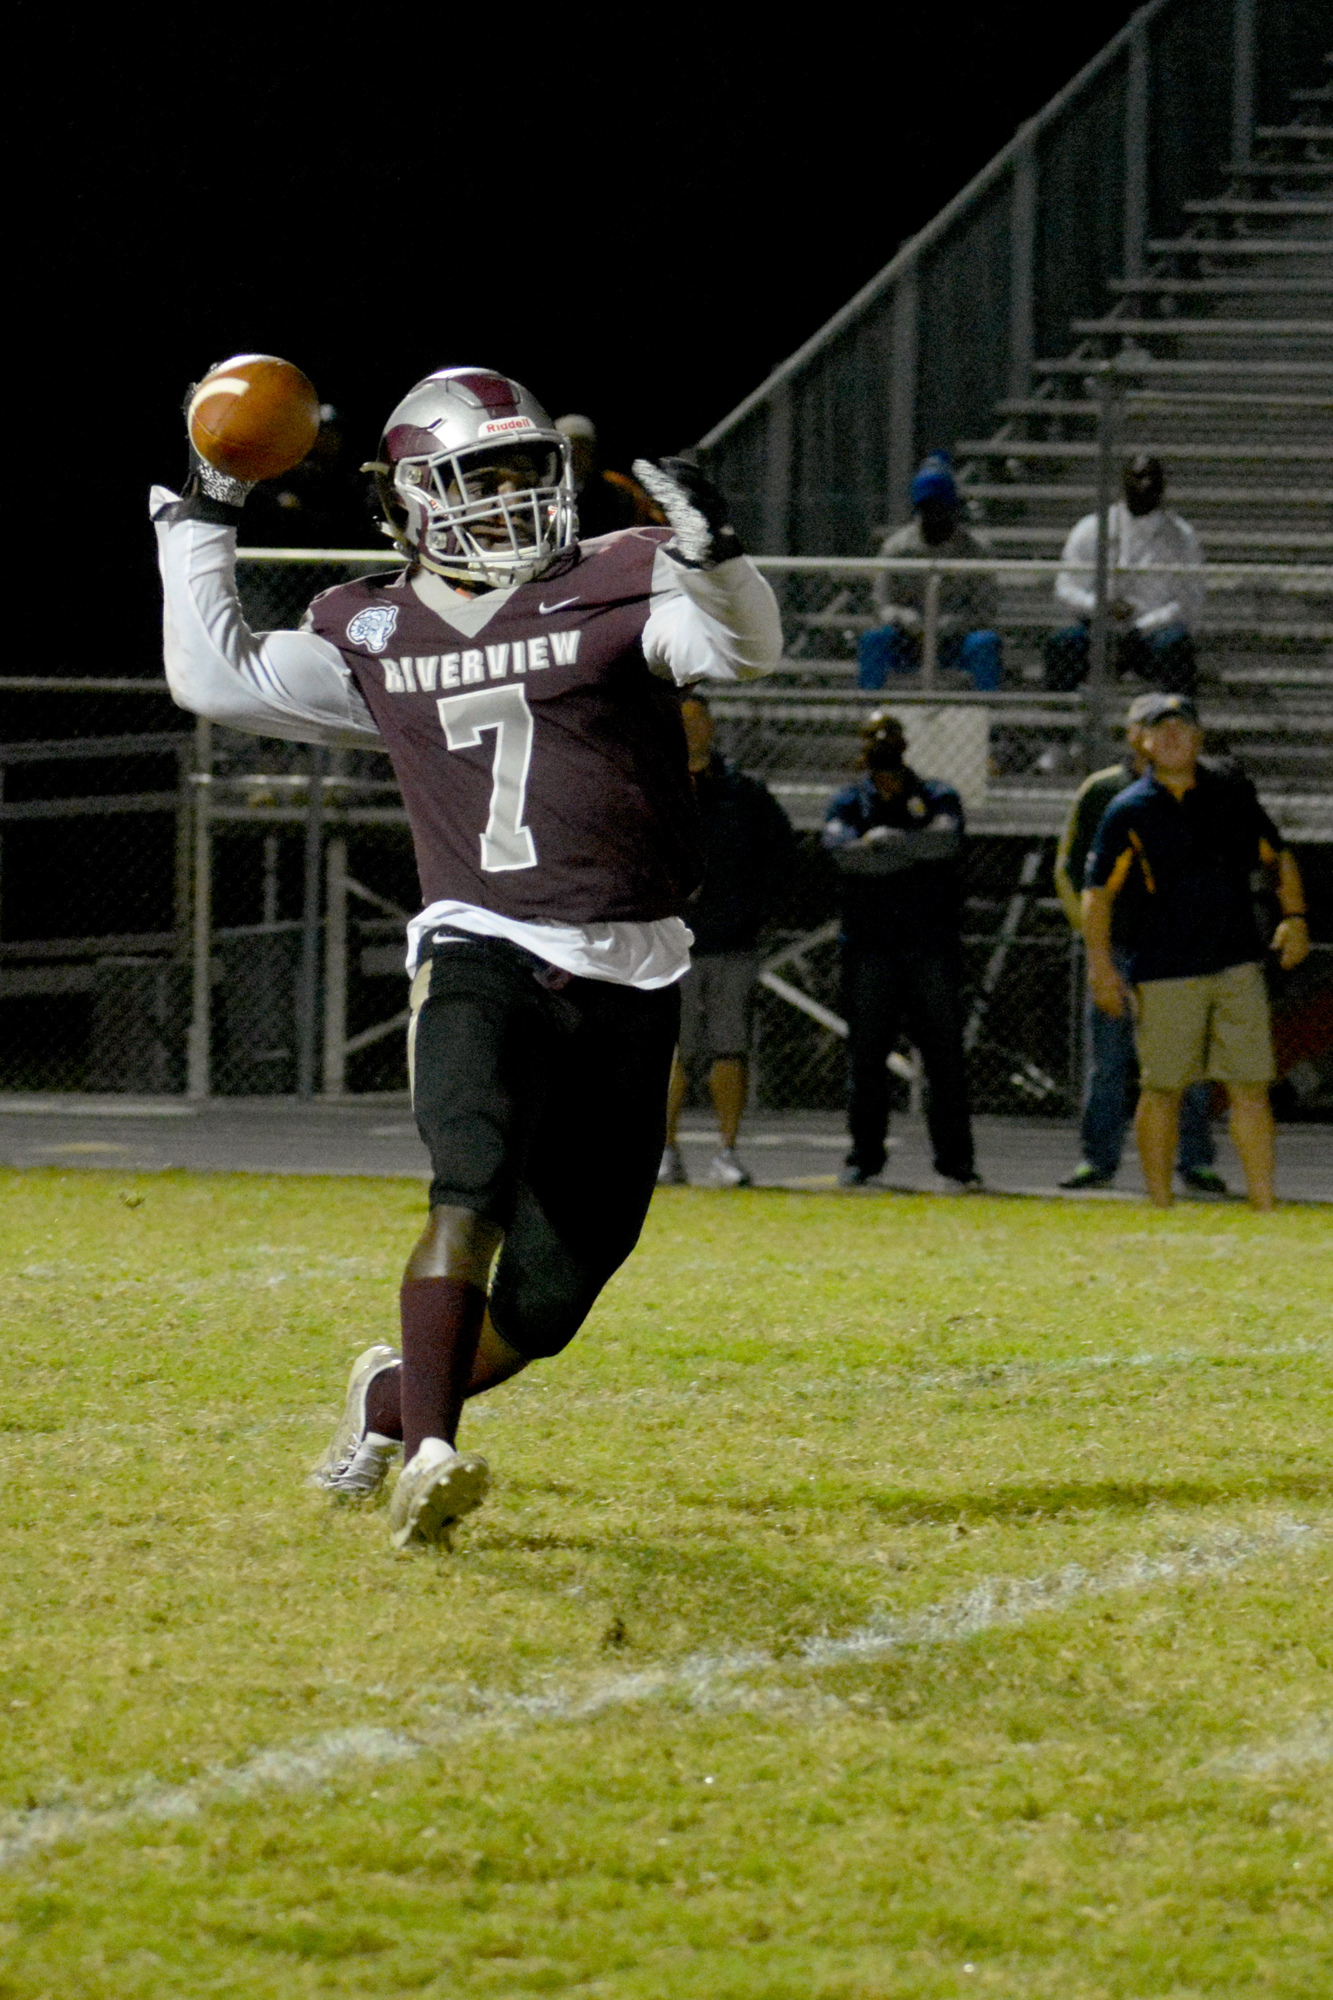 Michael Hayes launches a wide receiver pass to his brother, Omari Hayes, for an 80-yard touchdown.